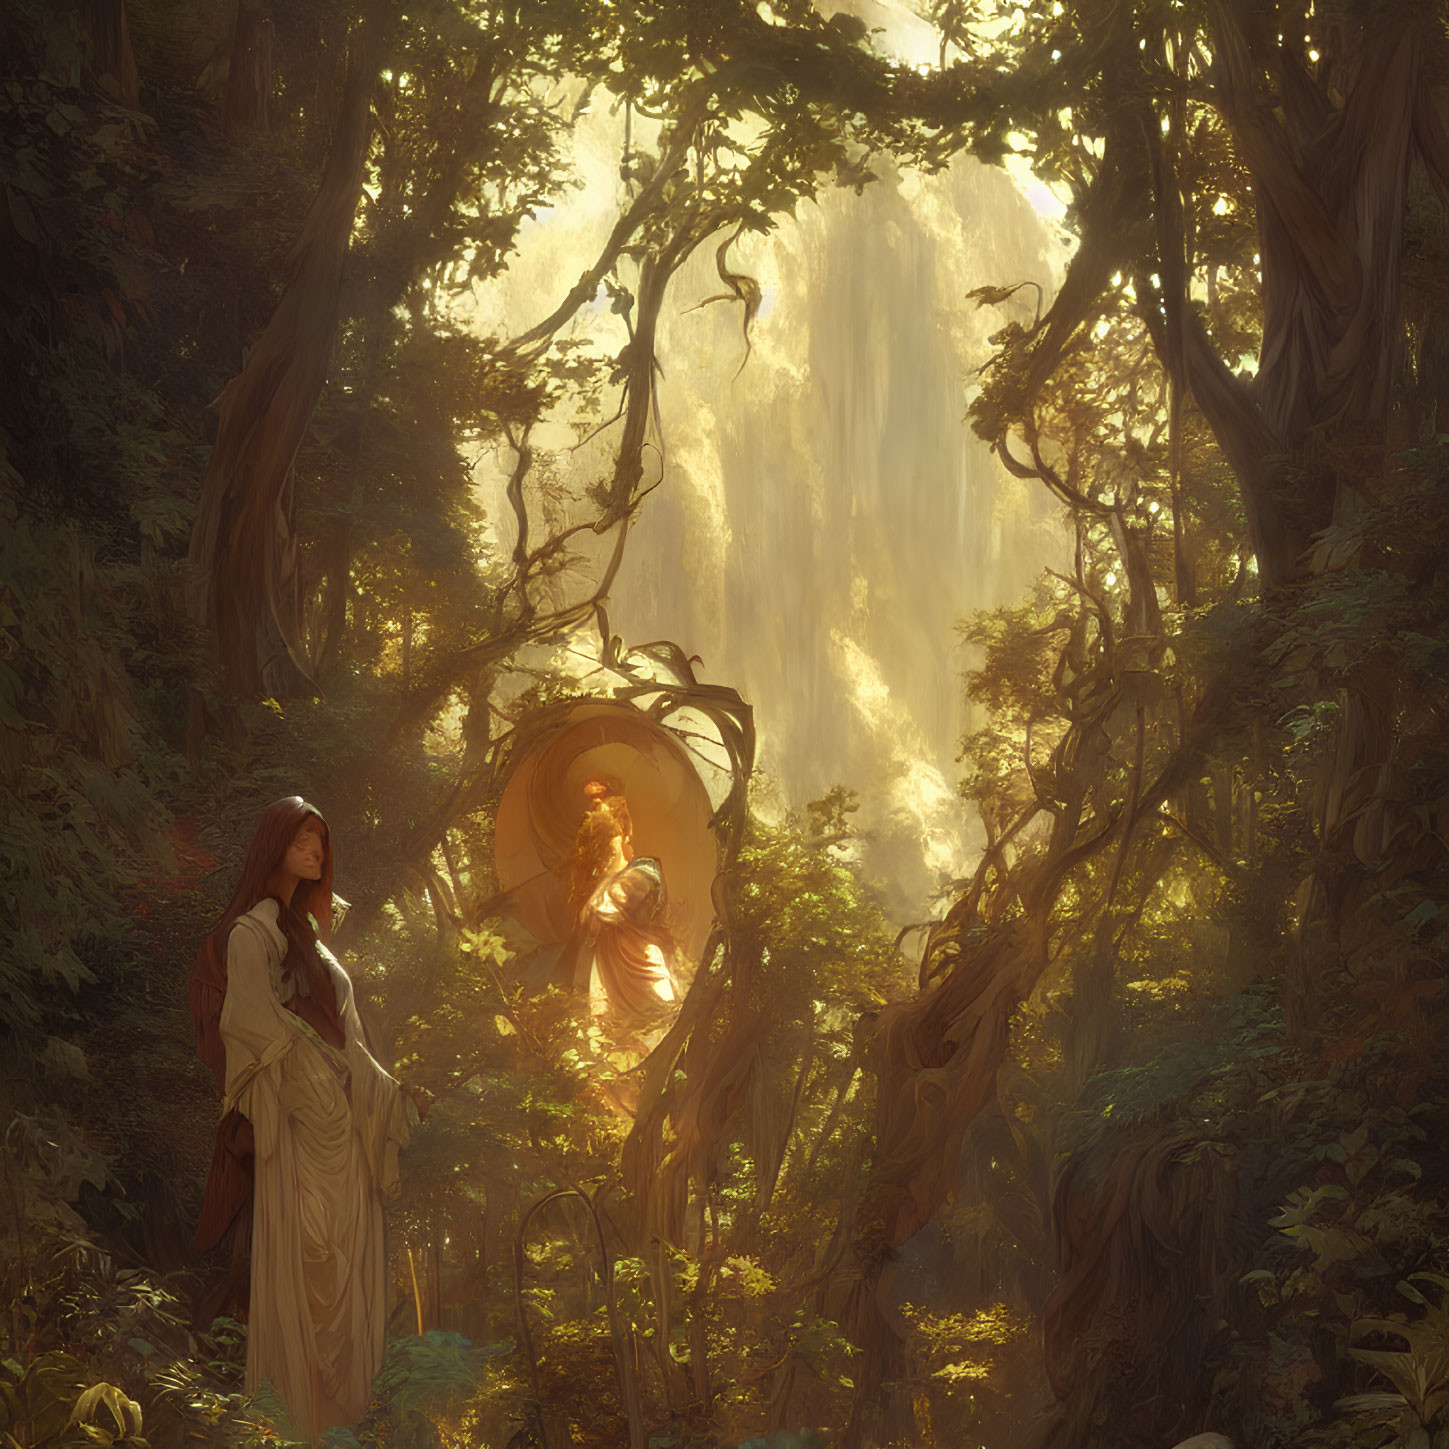 Enchanting forest scene with woman and luminous figure in portal